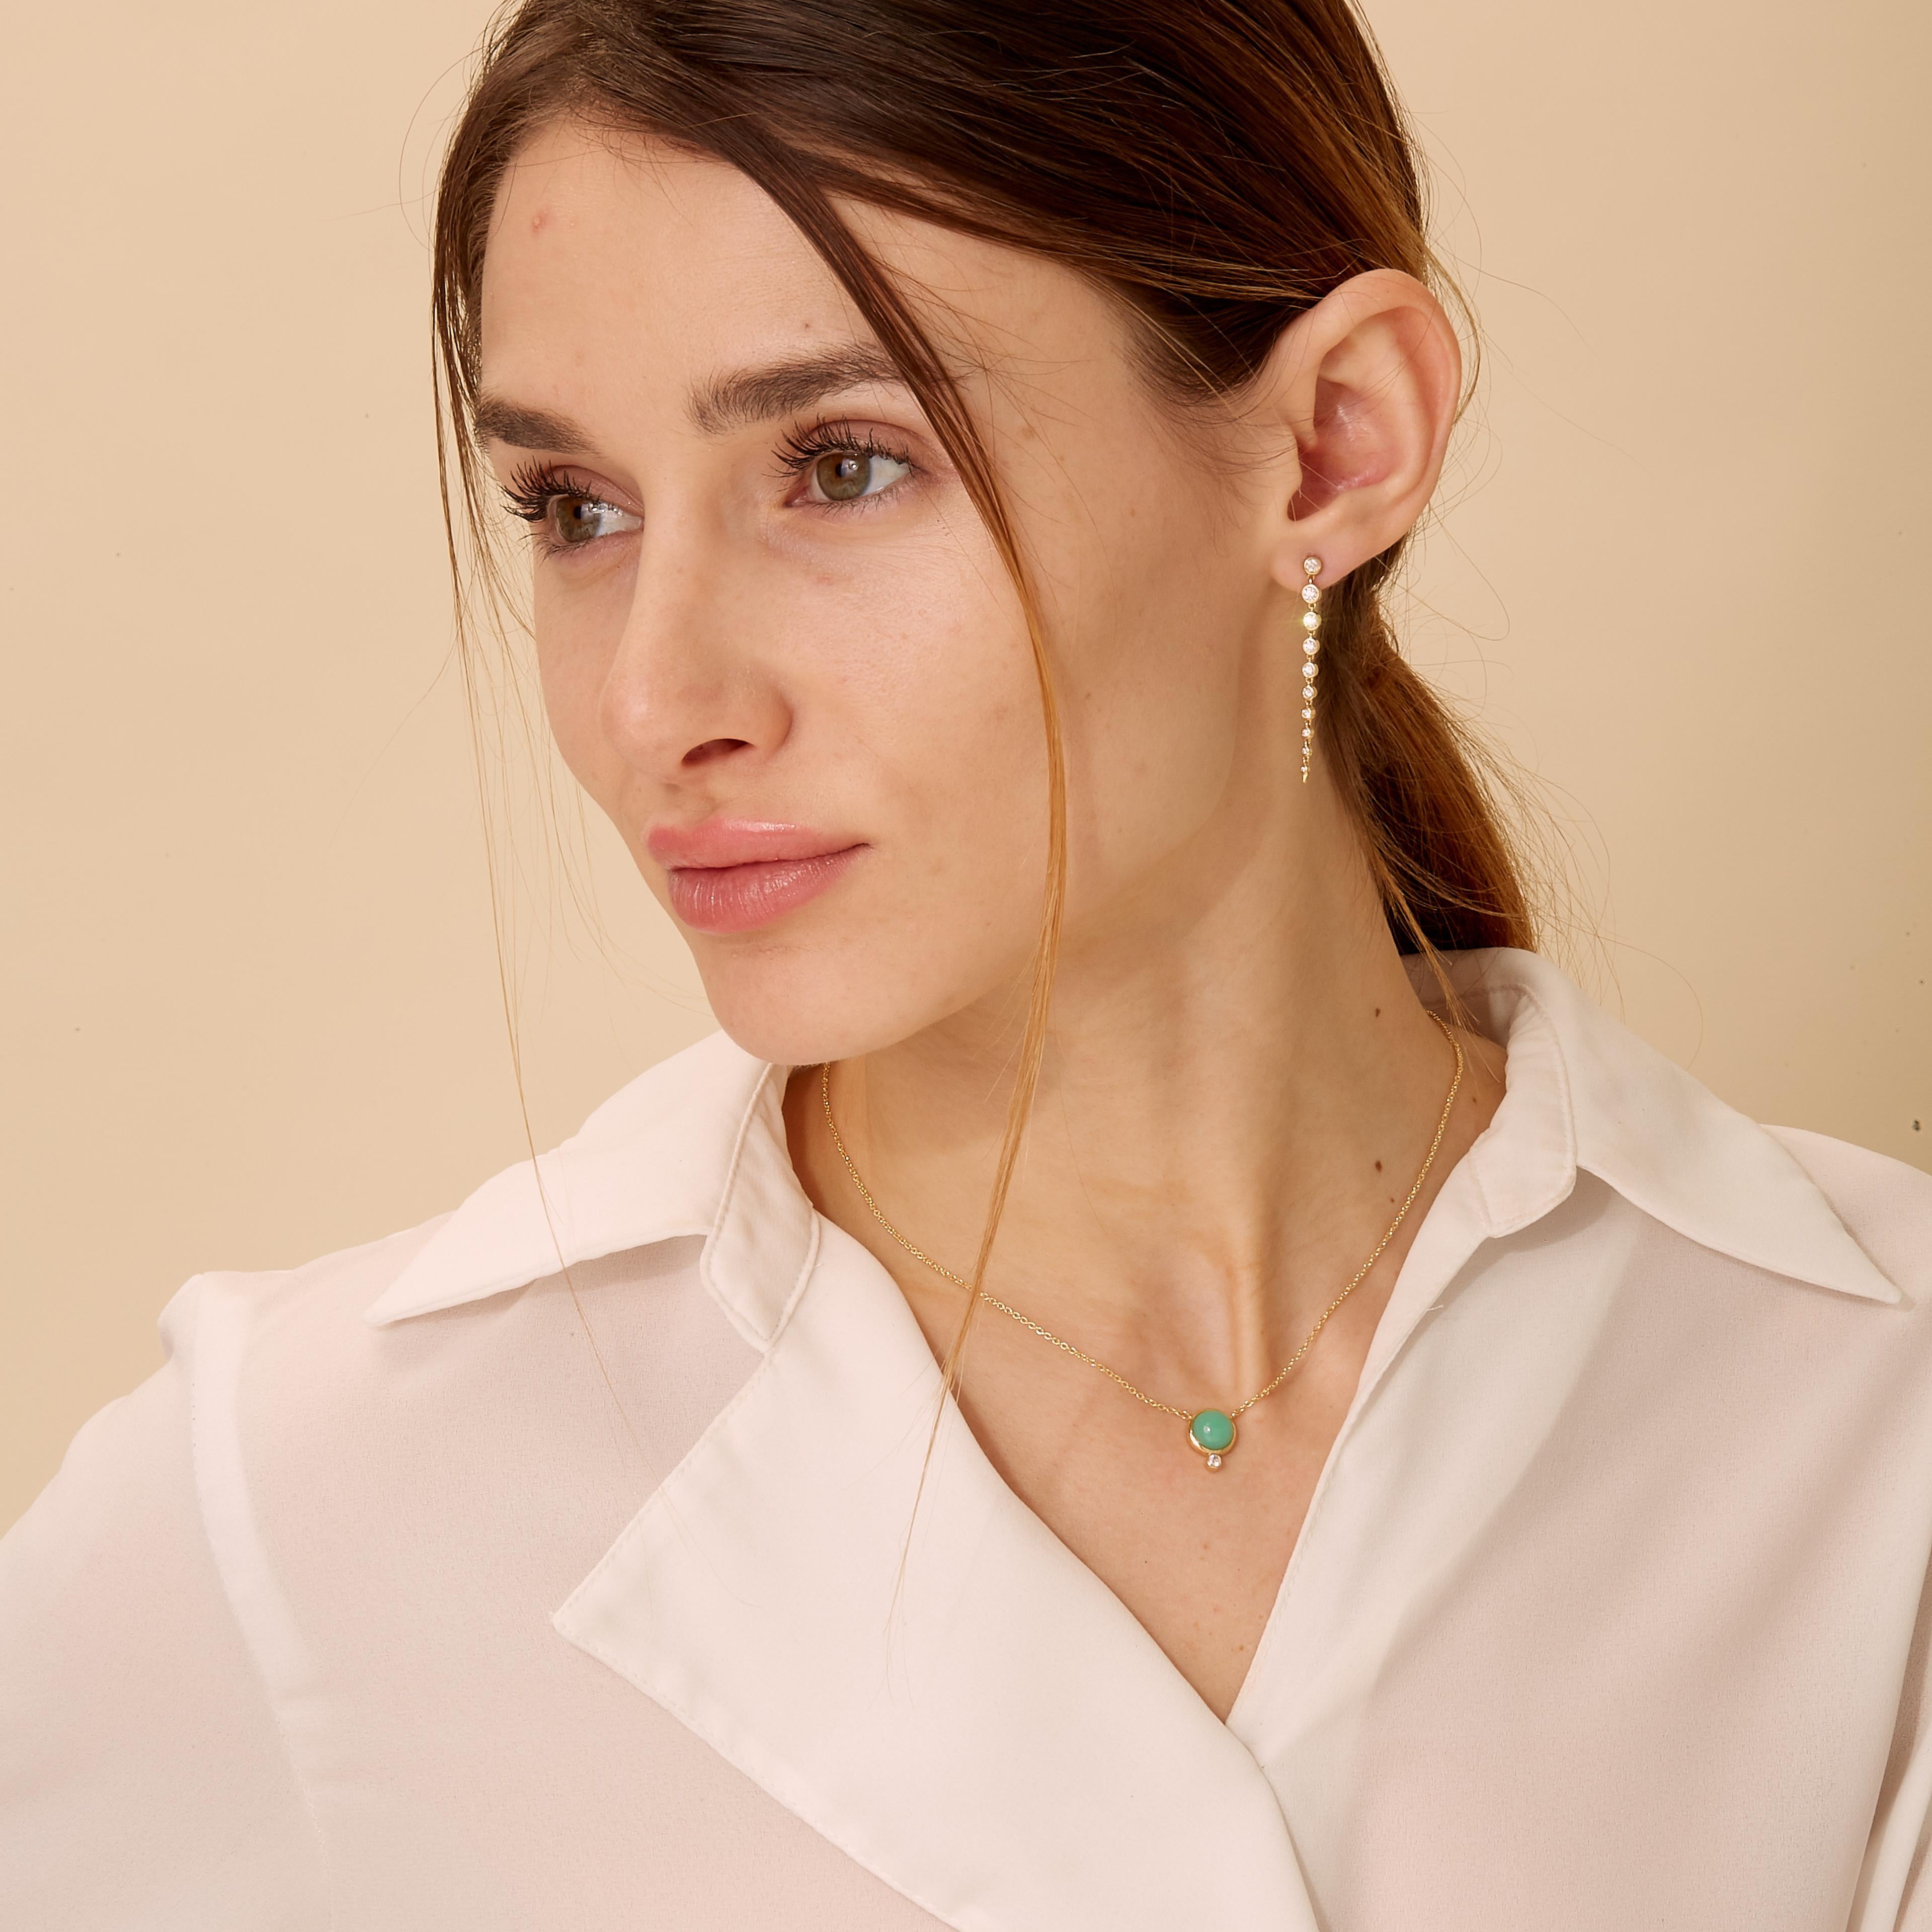 Created in 18 karat yellow gold
Chrysoprase 2 carats approx.
Diamond 0.05 carat approx.
18 inch, adjustable at 16-17
Limited edition

Exquisitely crafted in 18 karat yellow gold, this limited edition necklace features a stunning chrysoprase of